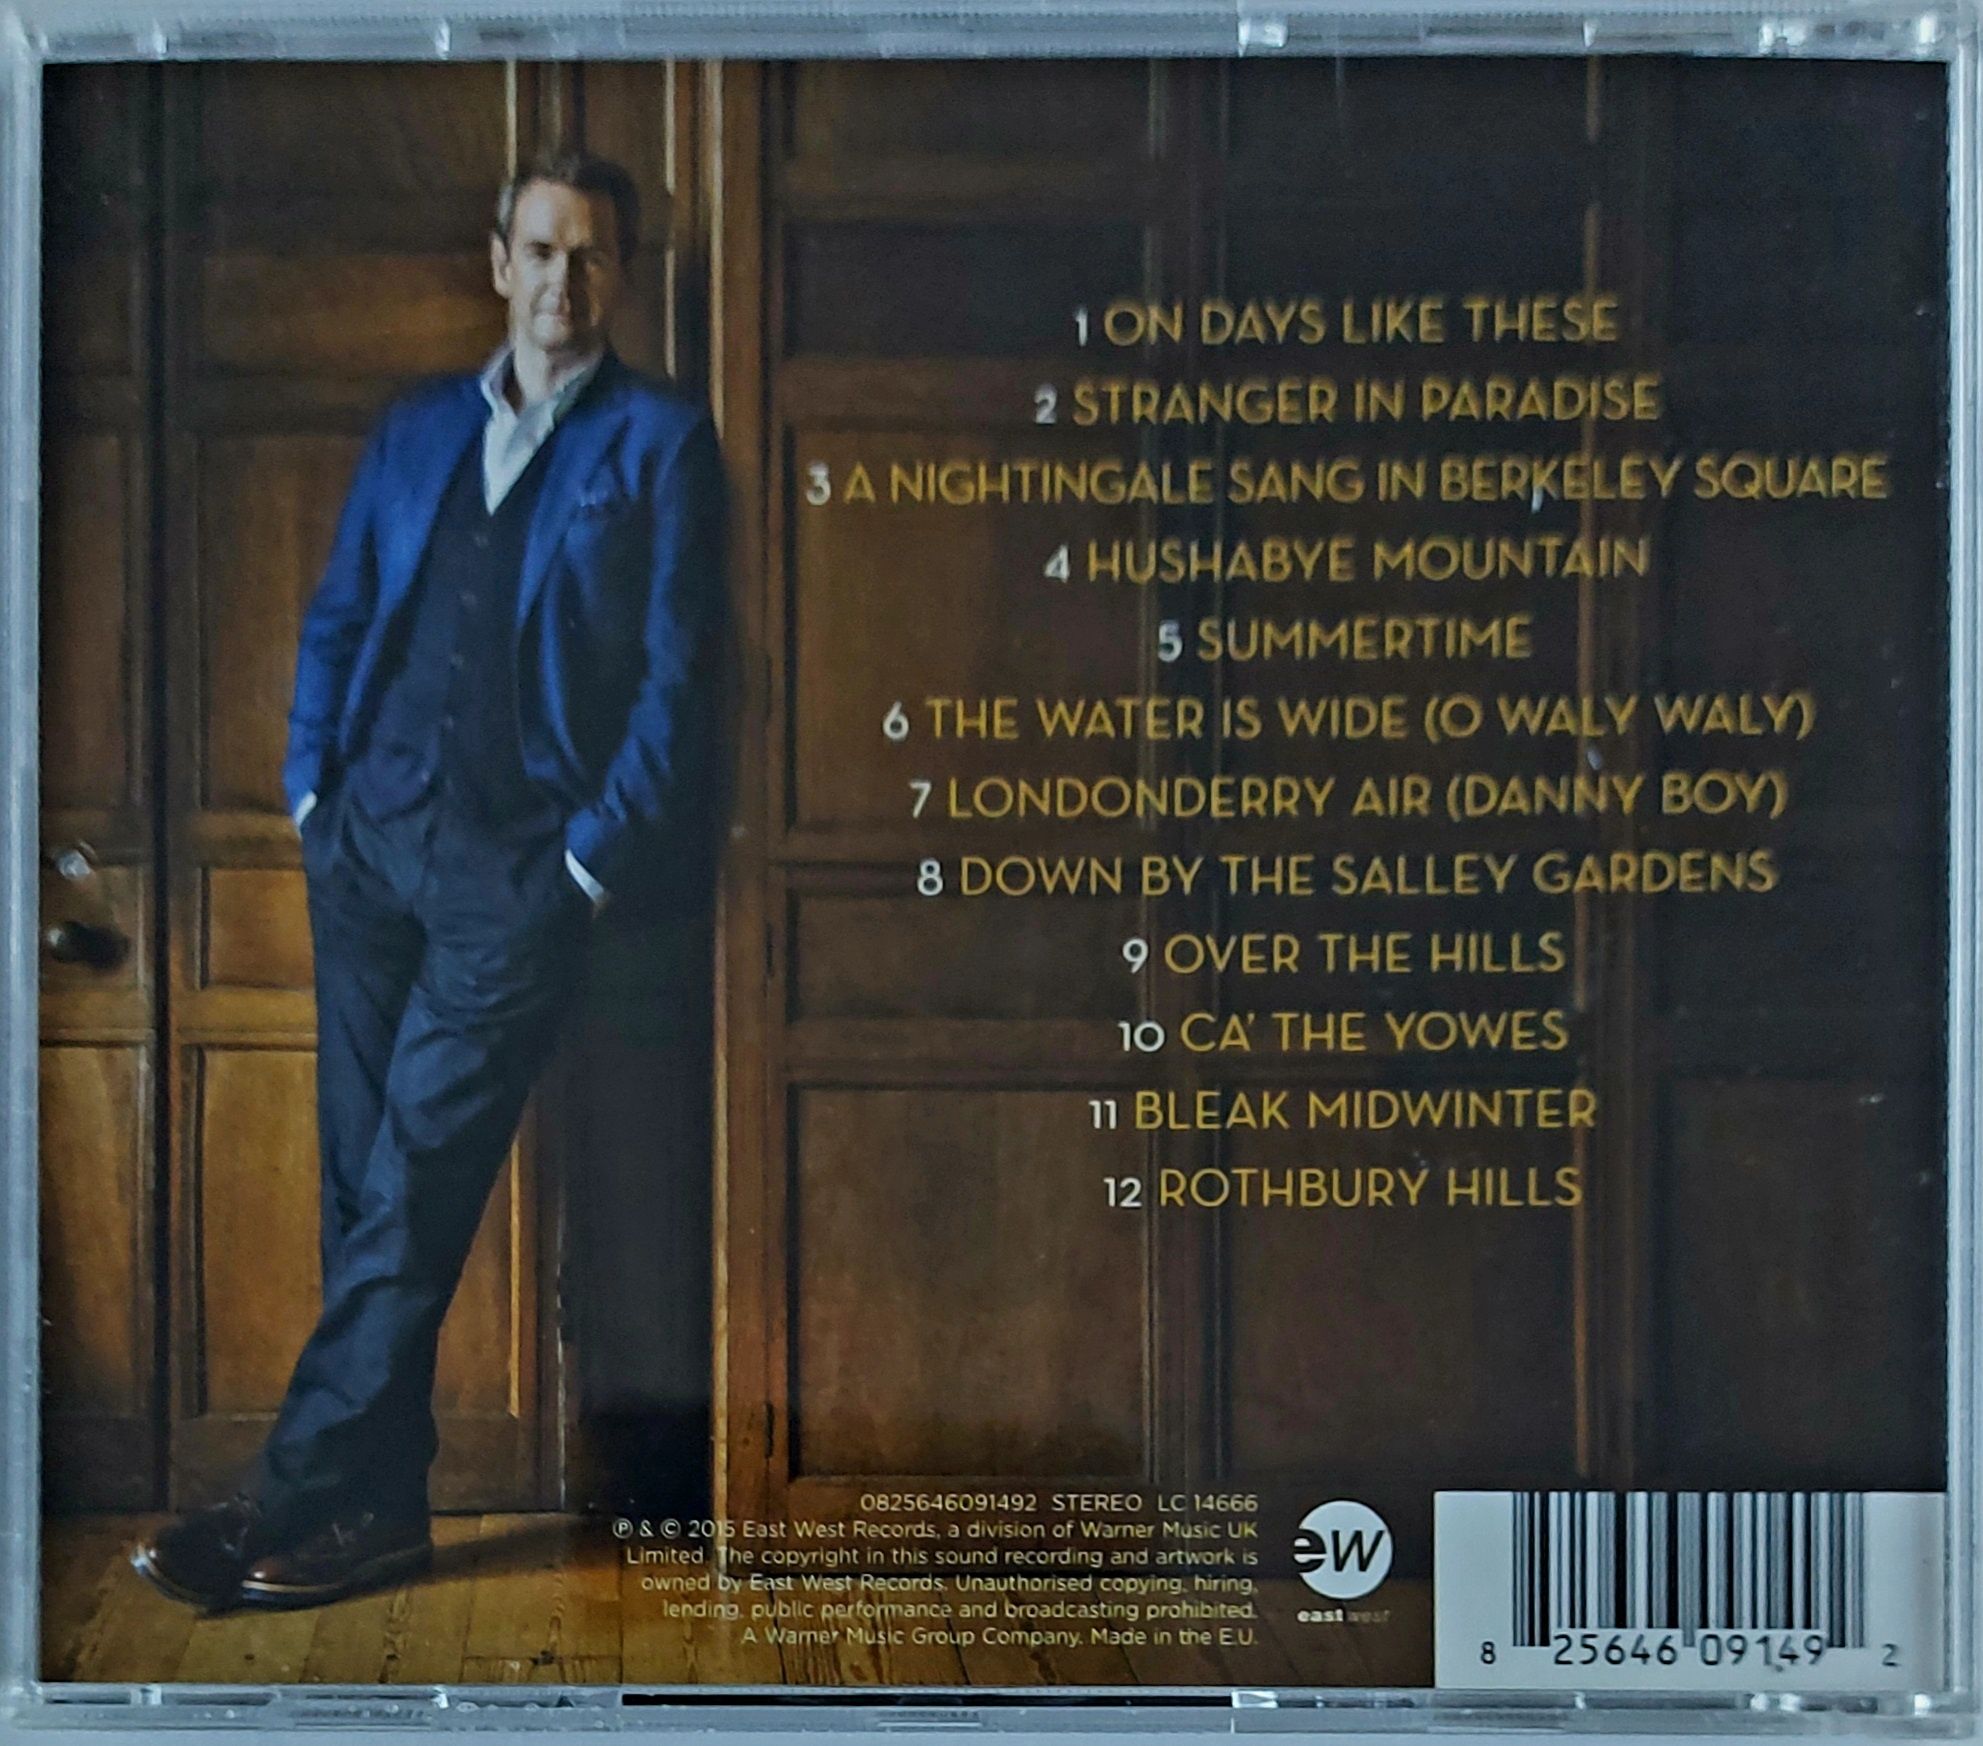 Alexander Armstrong A Year Of Songs 2015r